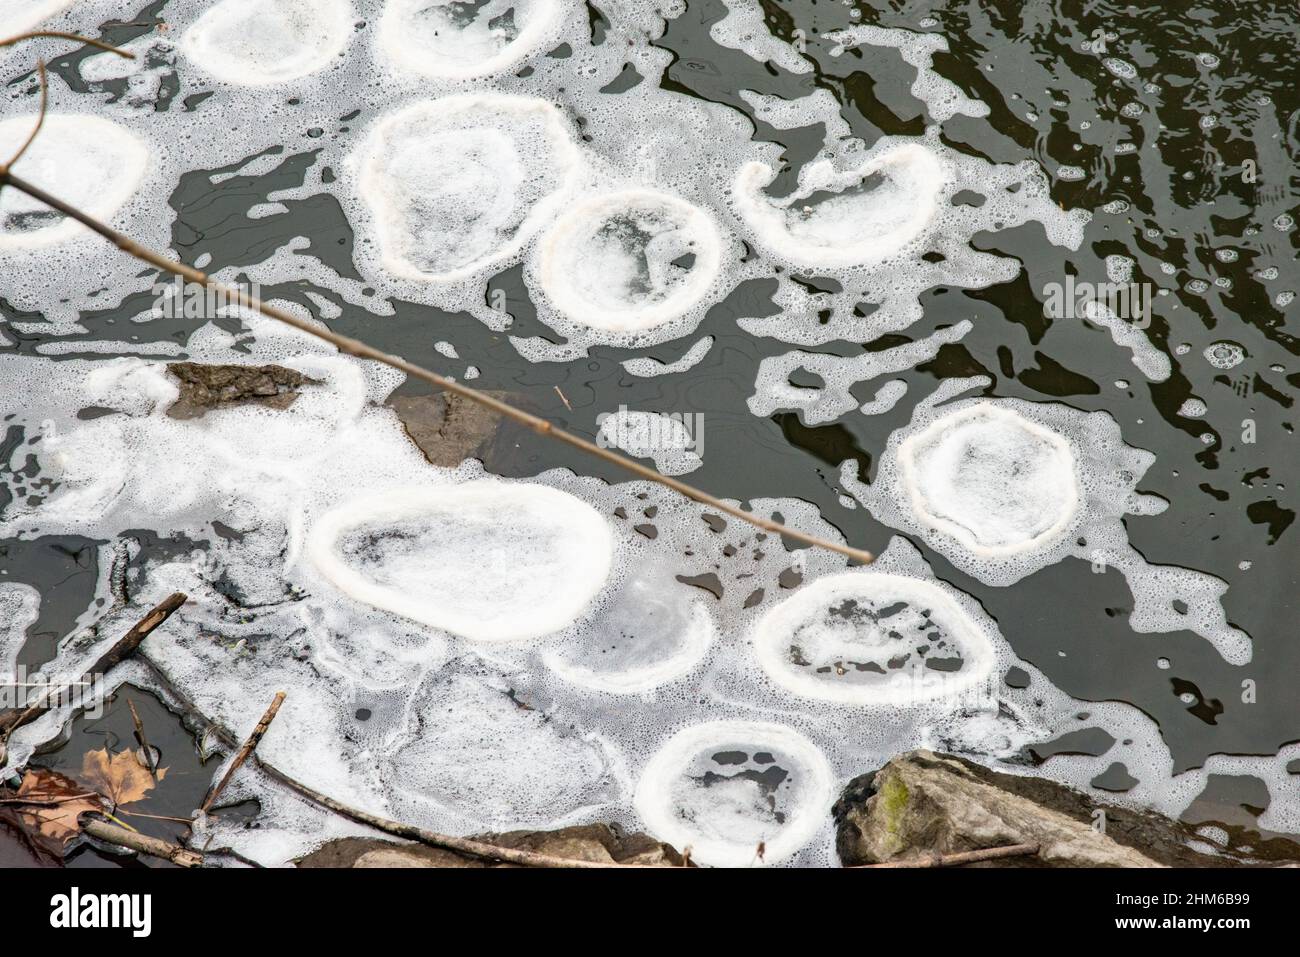 Ice discs, ice circles, ice pans, ice pancakes or ice crepes are a very rare natural phenomenon that occurs in slow moving water in cold climates. Stock Photo